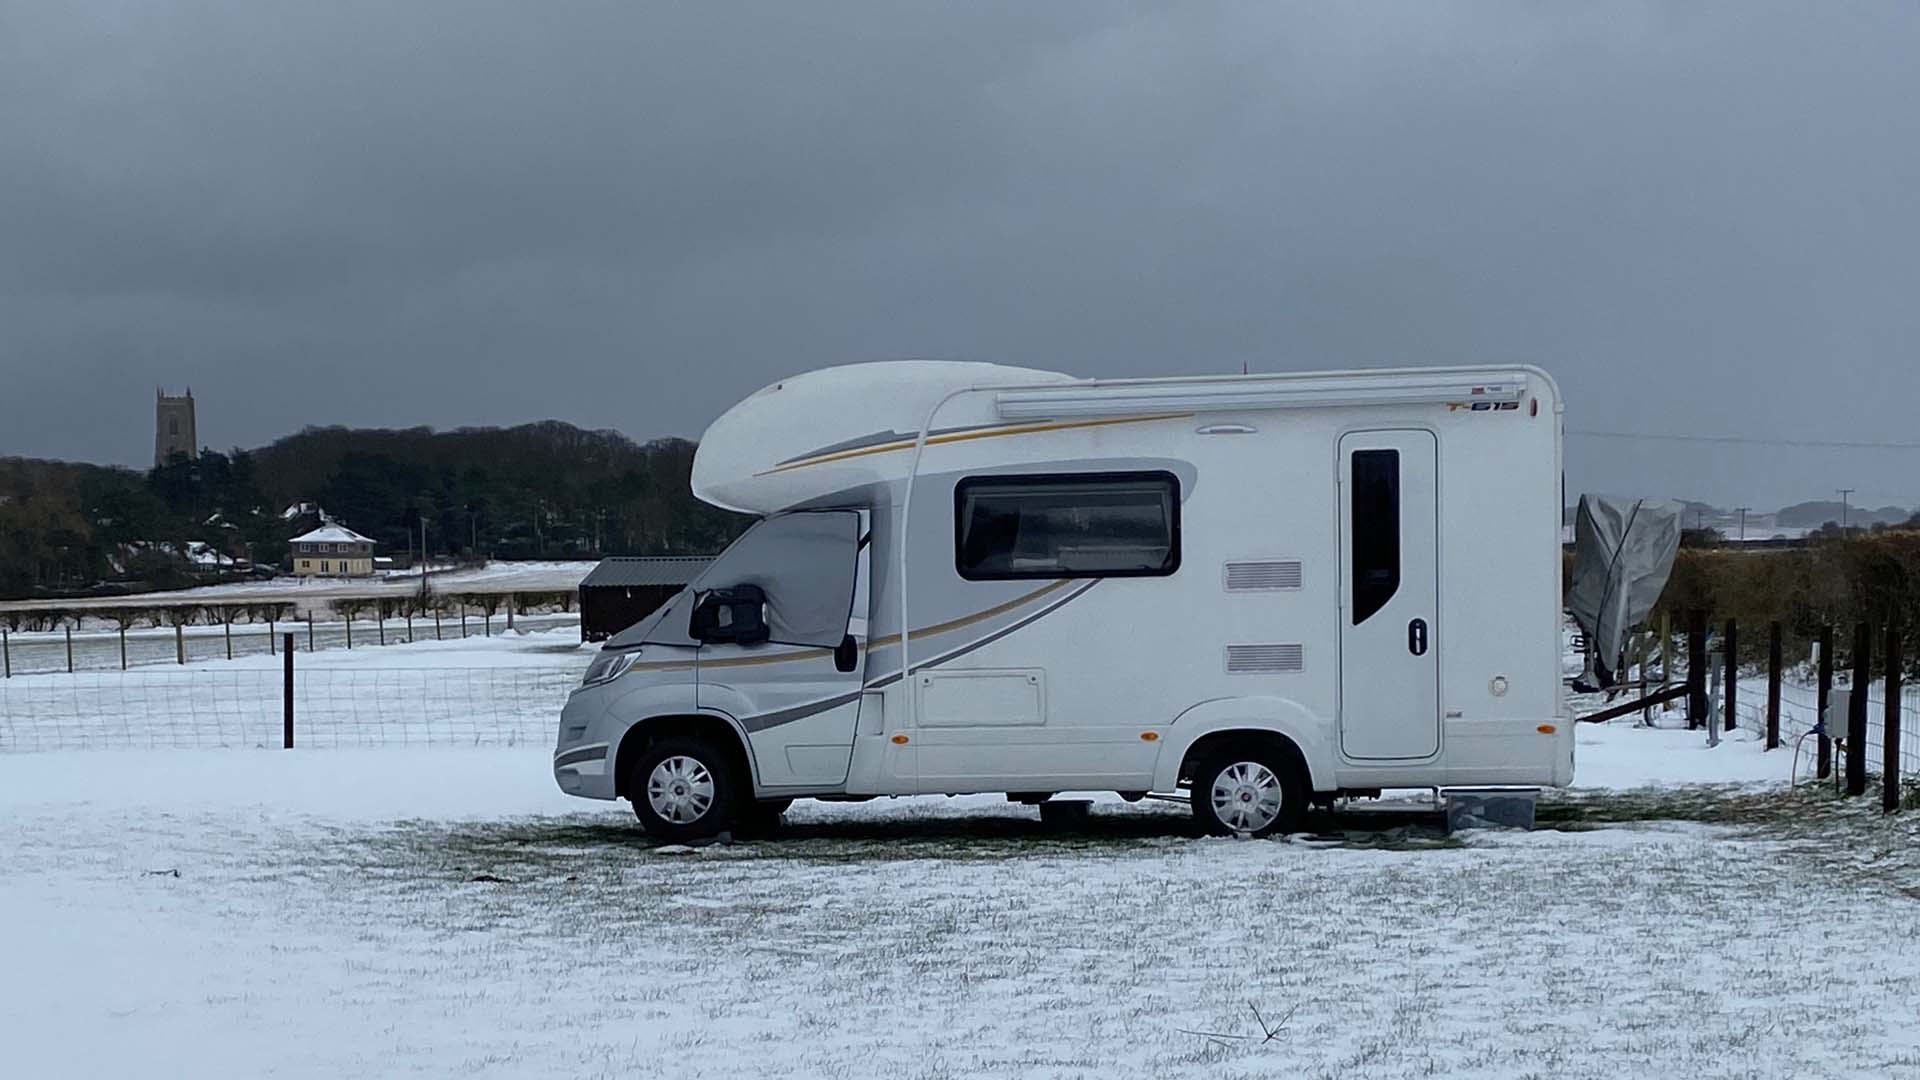 A motorhome covered in snow in a field